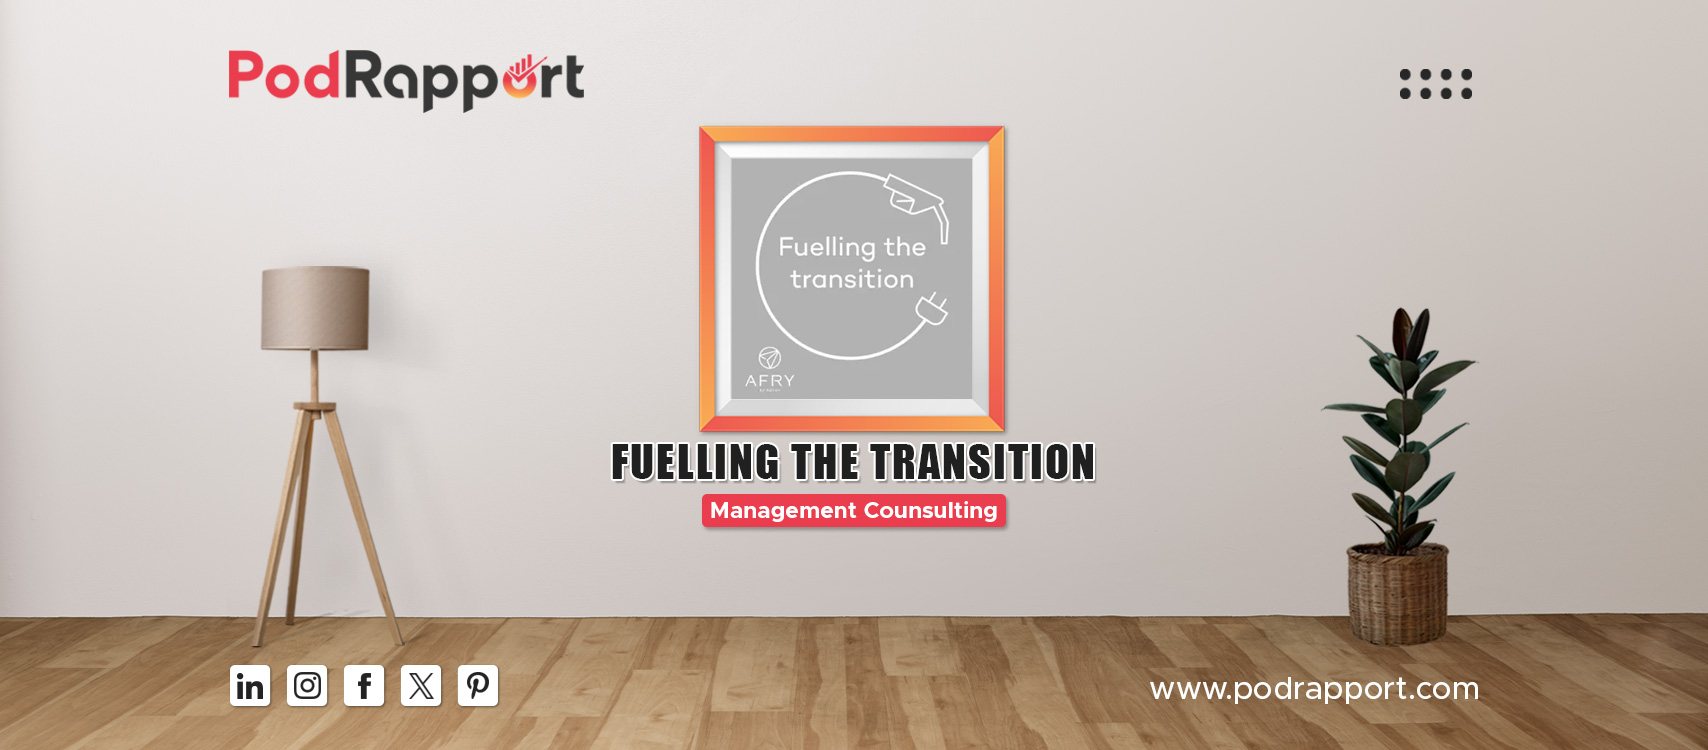 Fuelling the transition